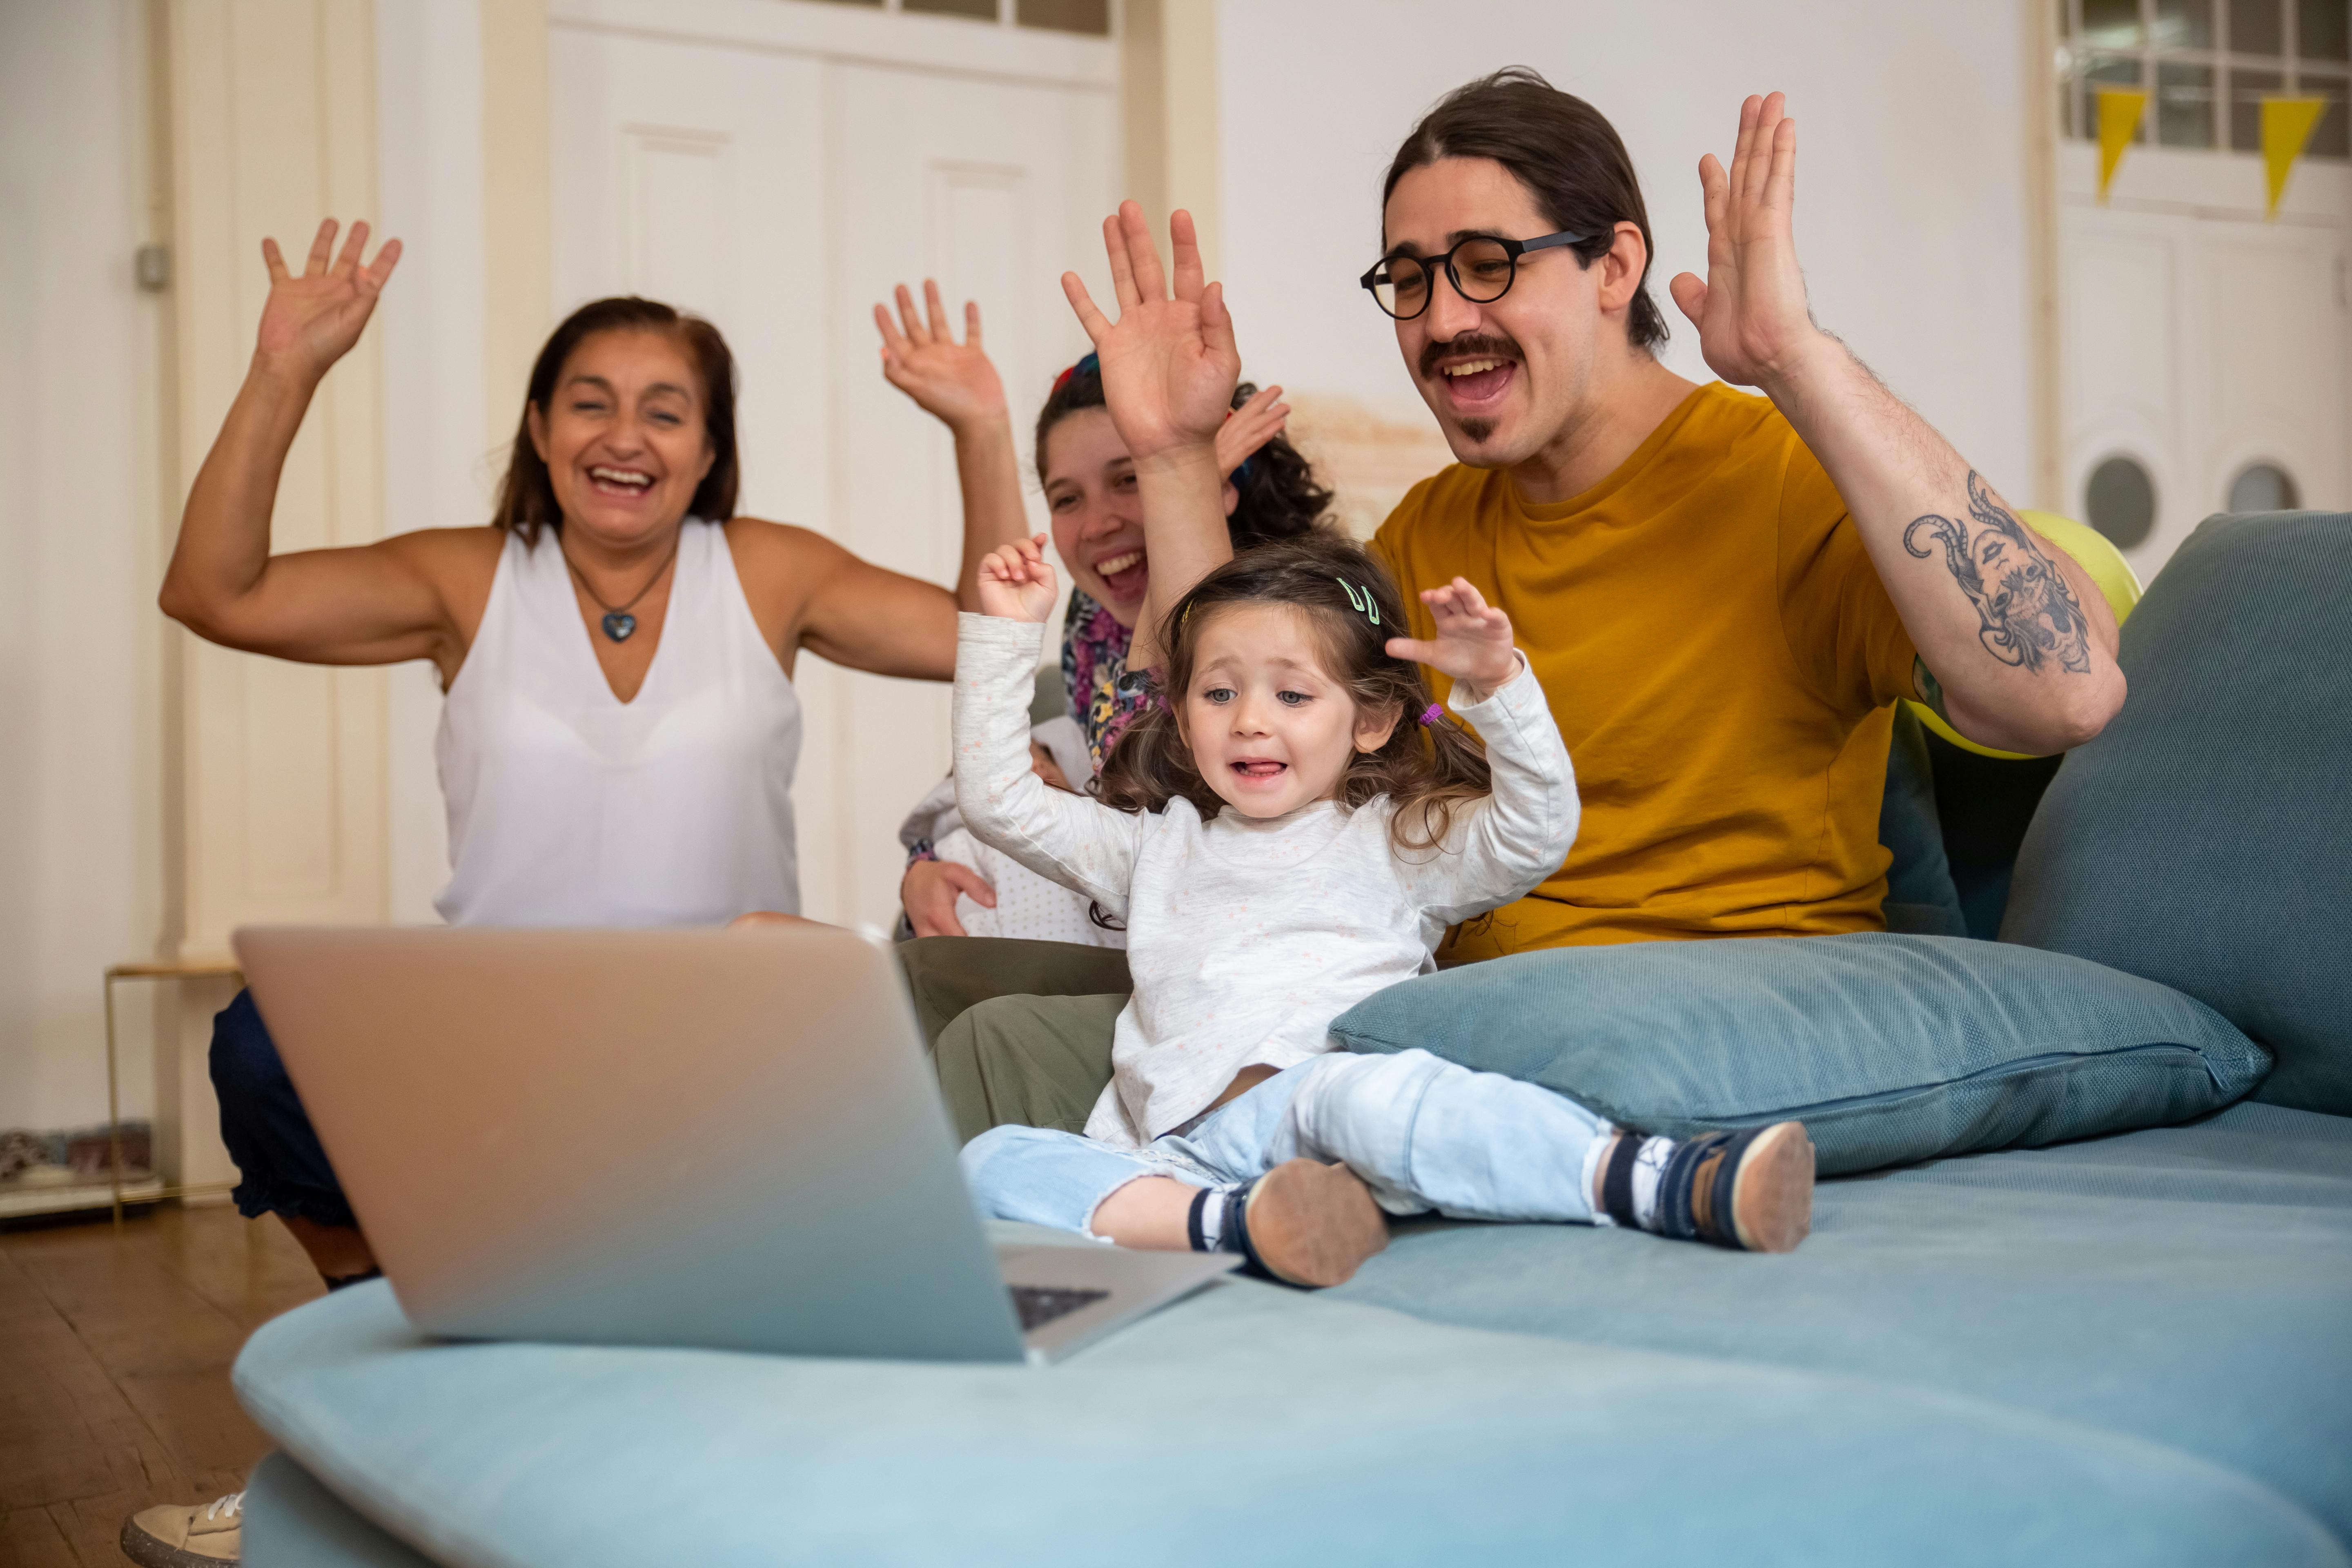 a happy family looking at the laptop while raising their hands together